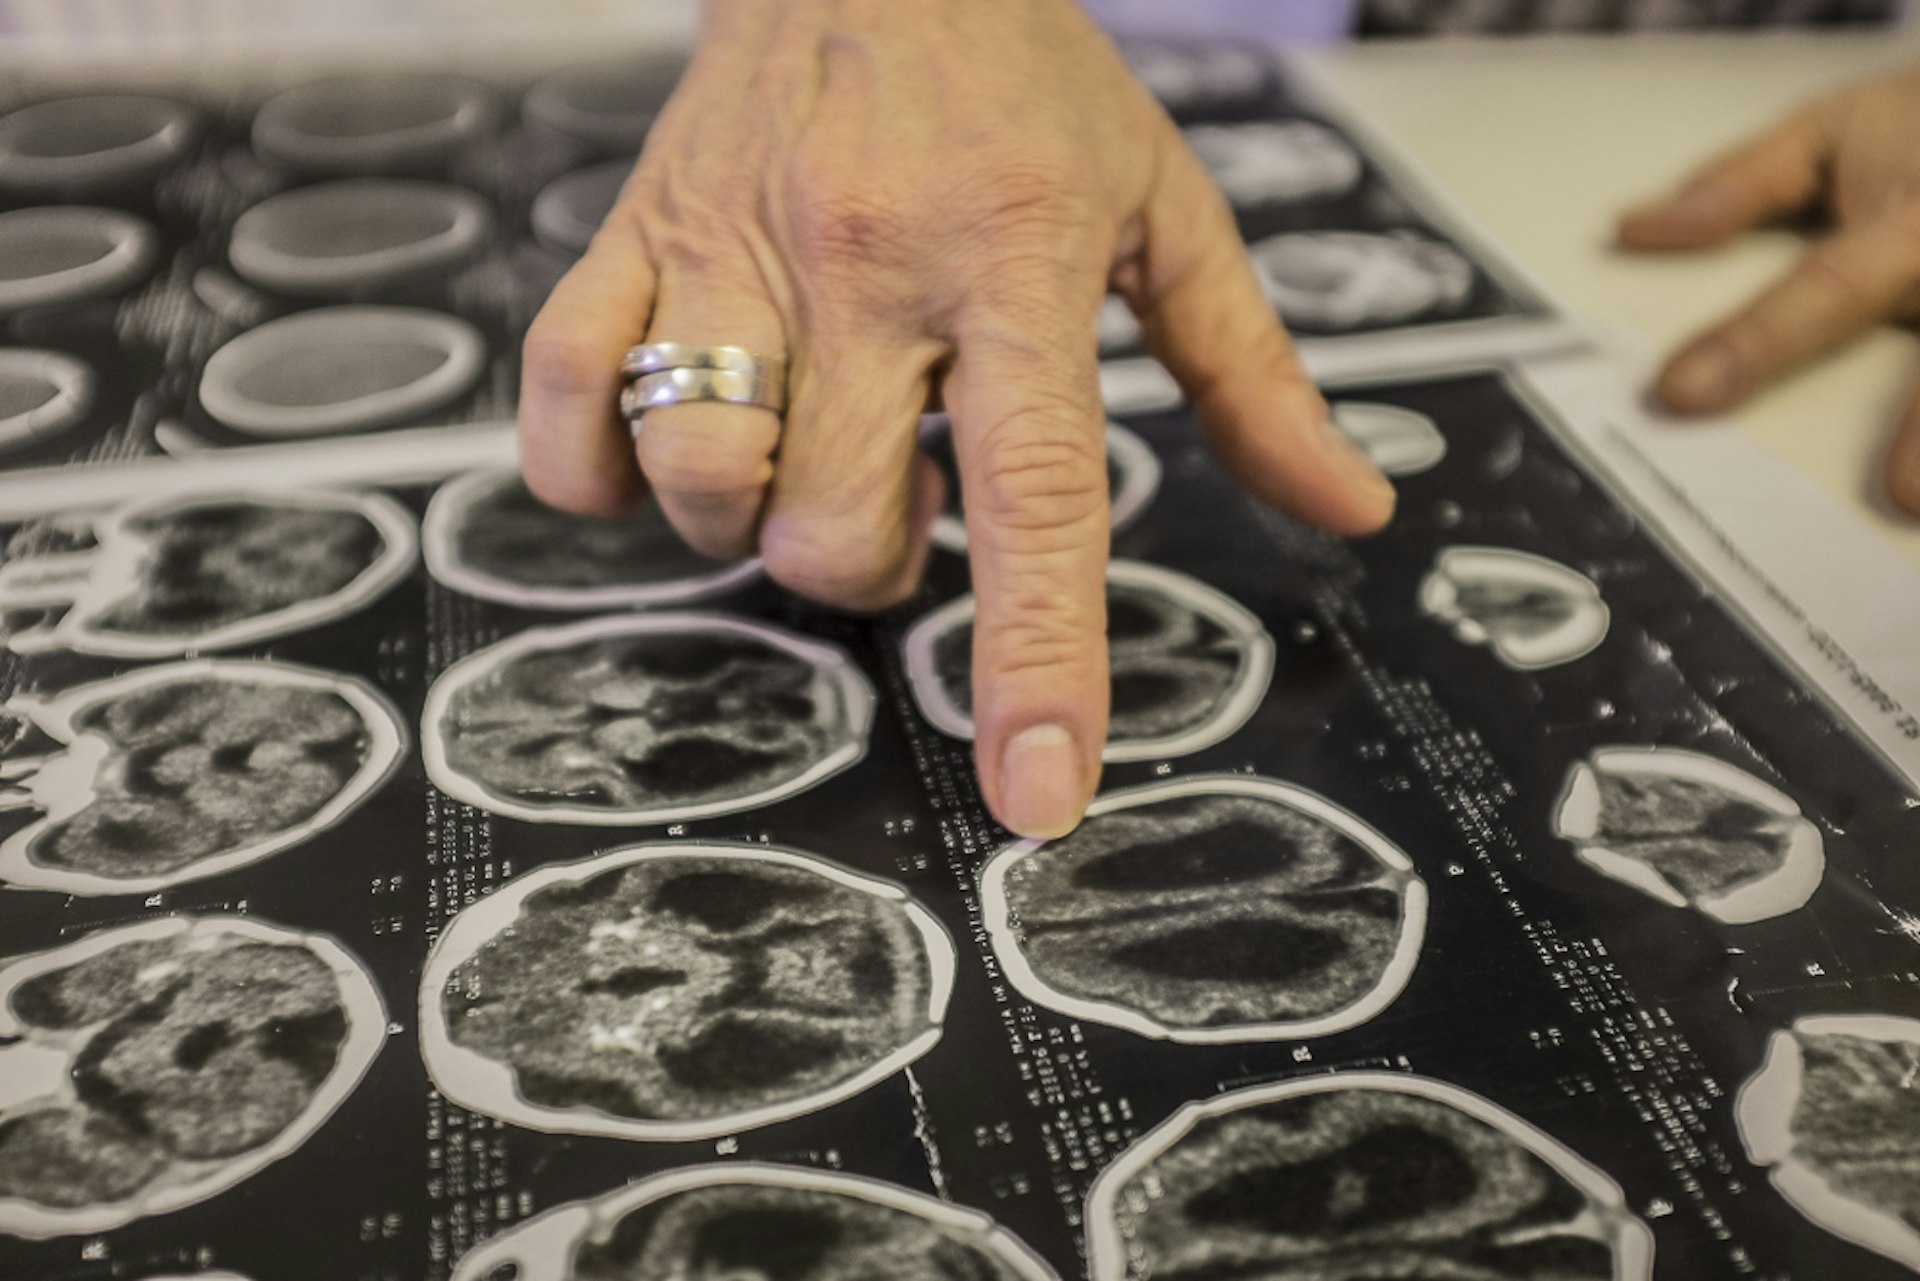 Angela Rocha, 67, infectologist at the Oswaldo Cruz hospital in Recife, Pernambuco, showing a brain tomography of an infant with microcephaly